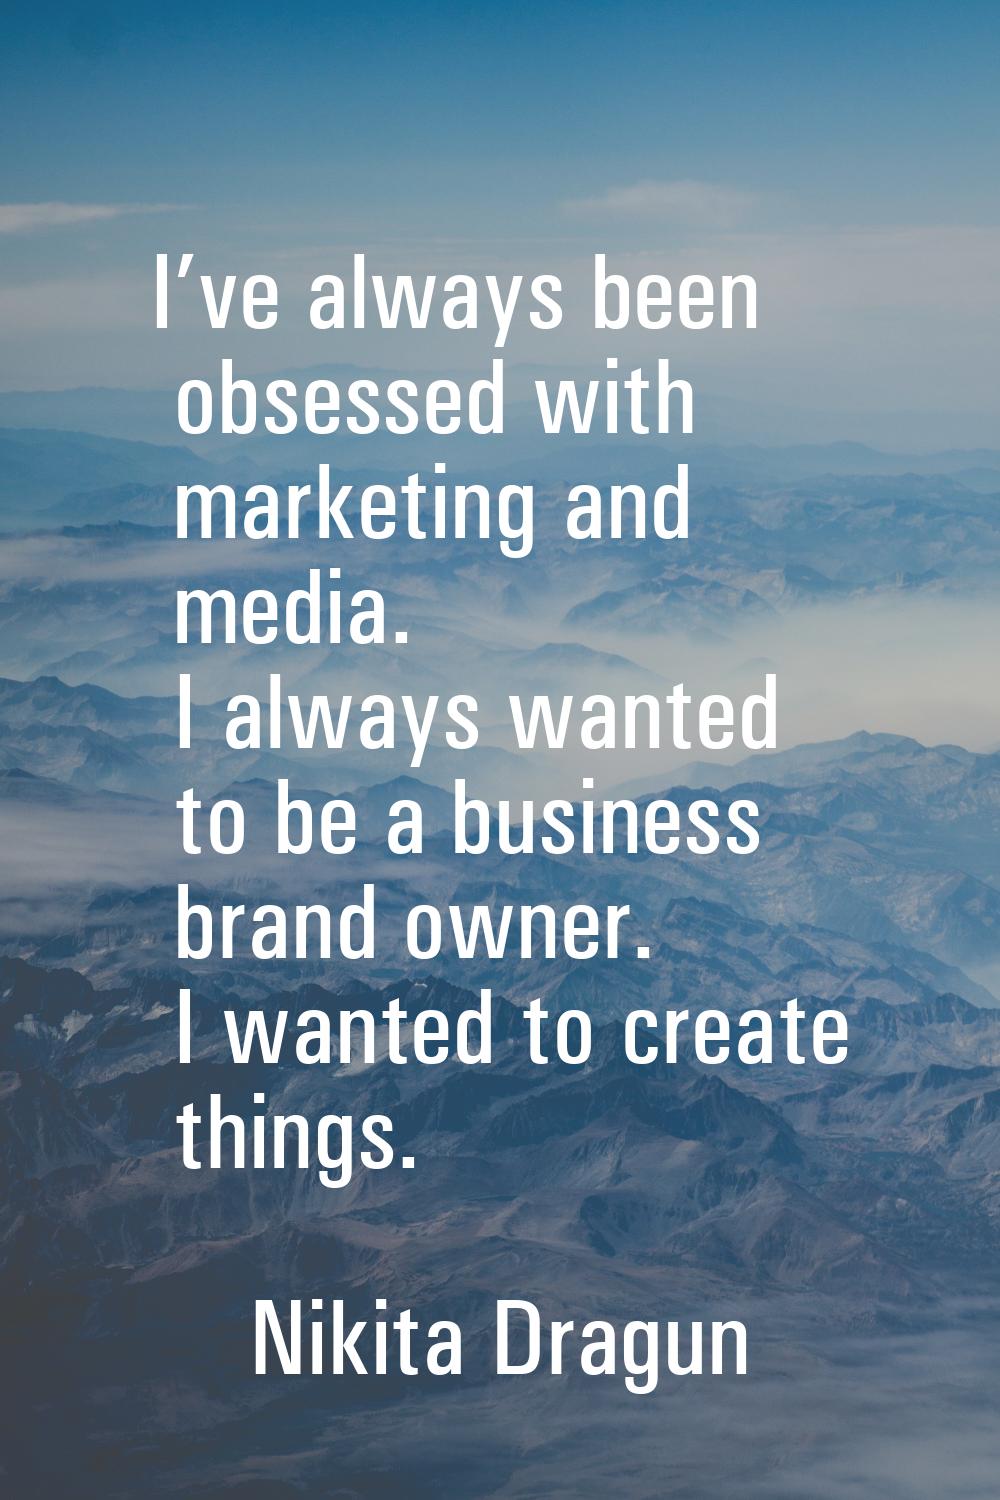 I’ve always been obsessed with marketing and media. I always wanted to be a business brand owner. I